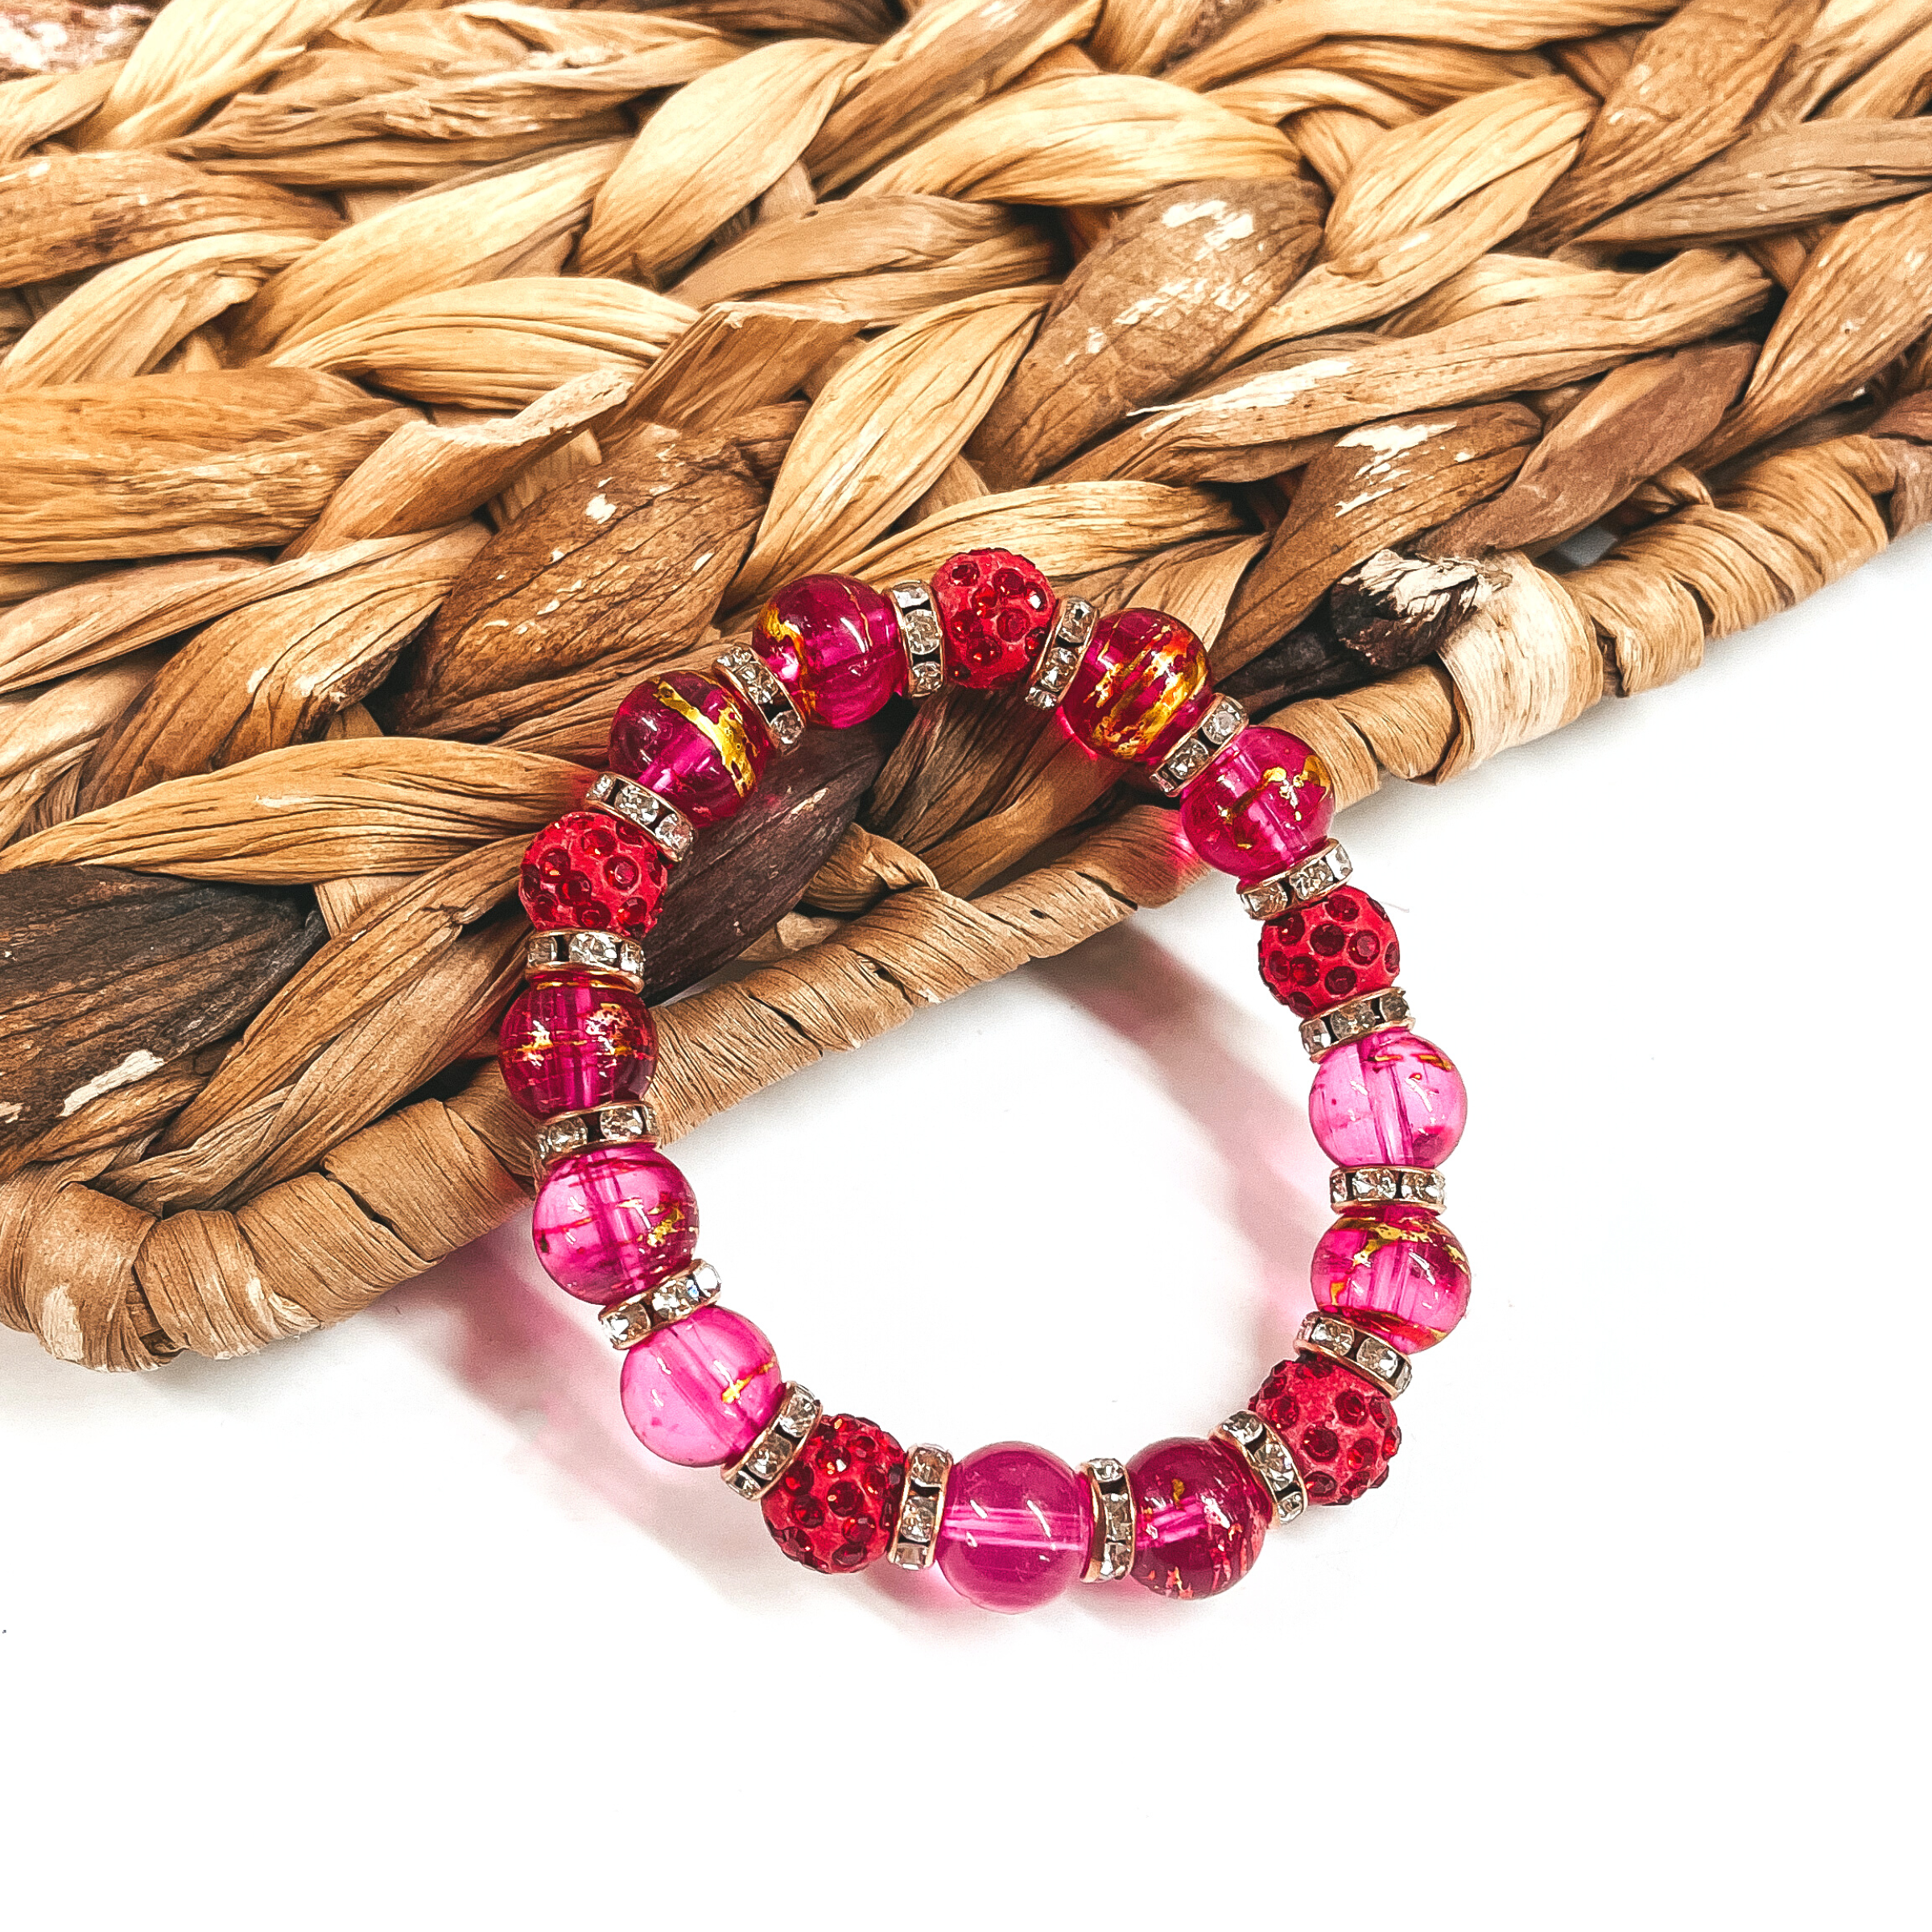 Buy 3 for $10 | Stretchy Bracelet with Crystal Detailing - Giddy Up Glamour Boutique